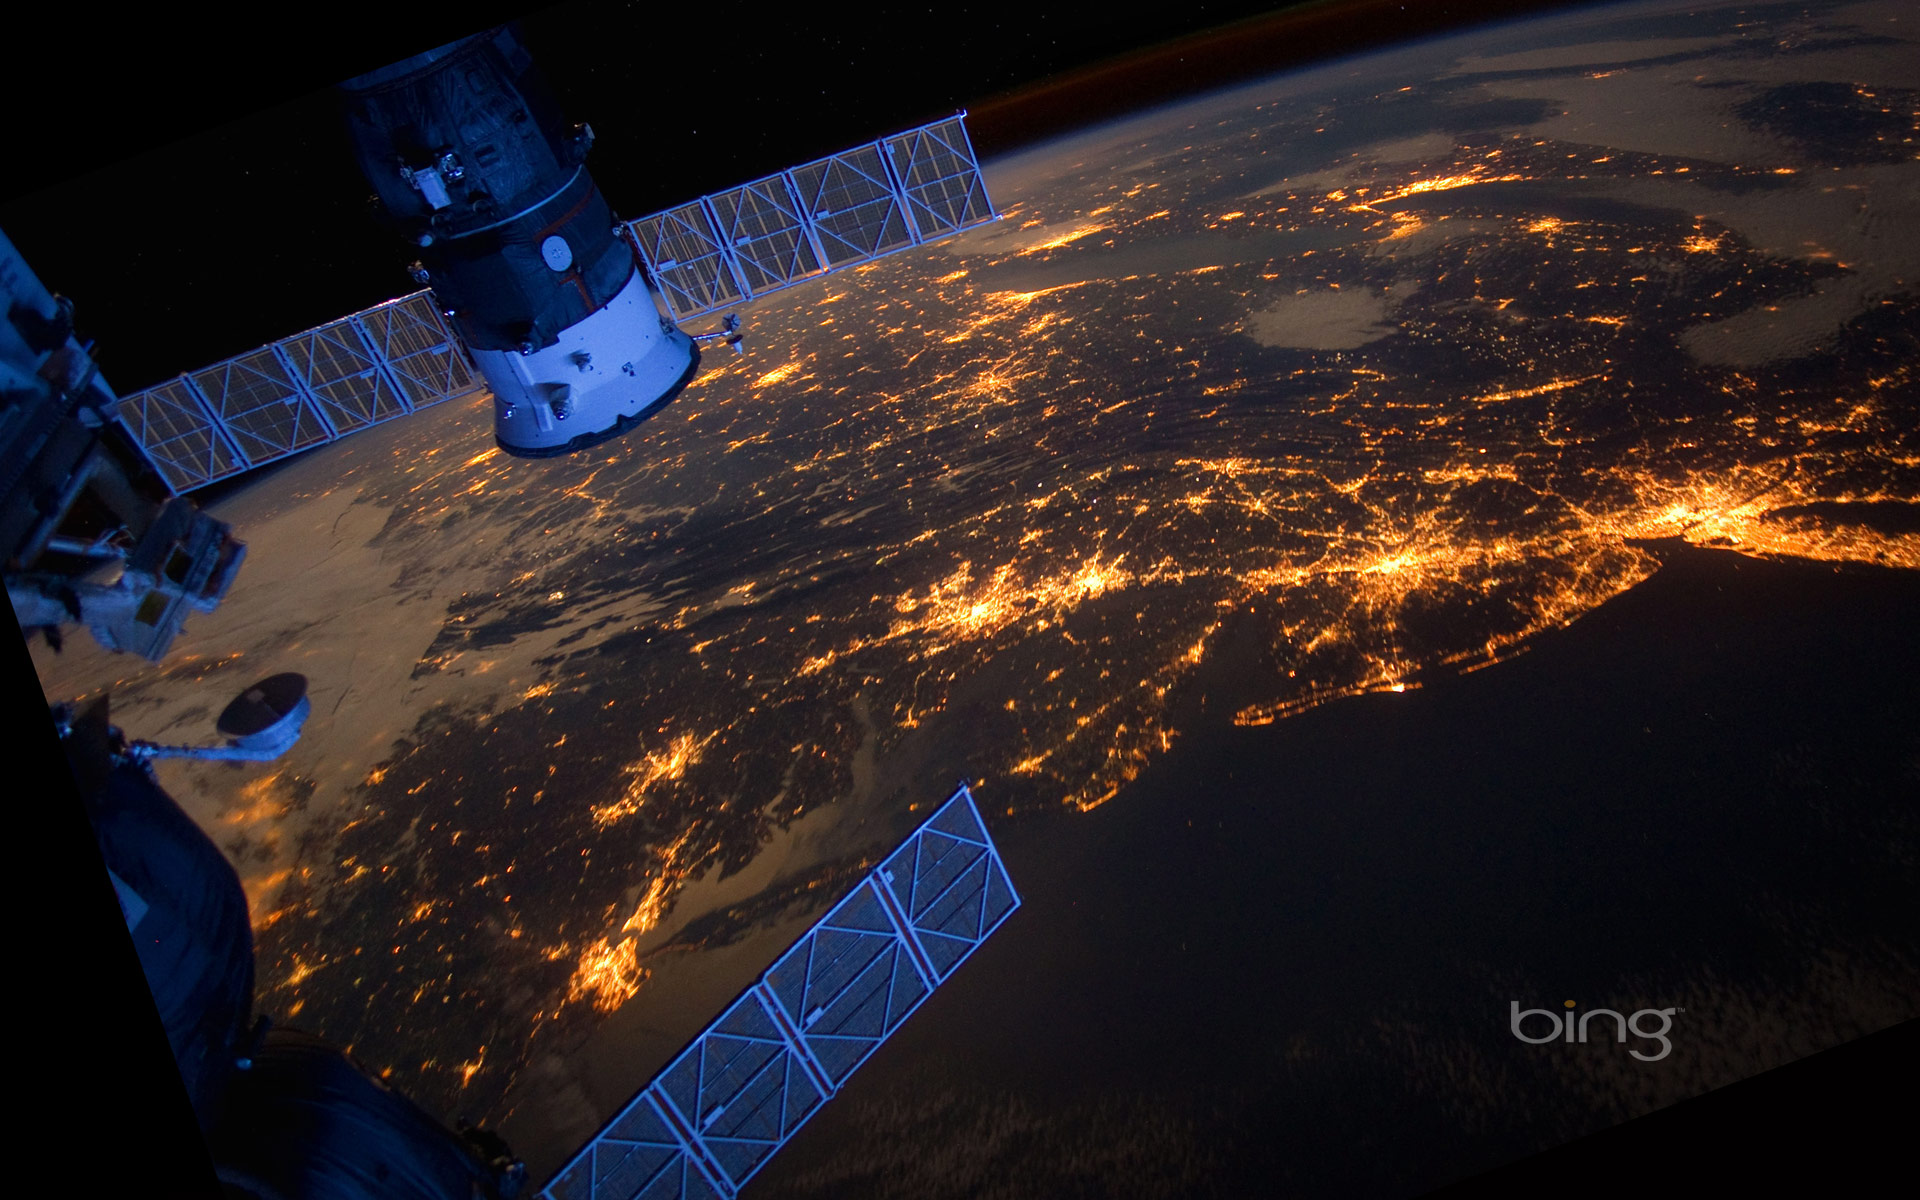 The East Coast Of United States As Seen From International